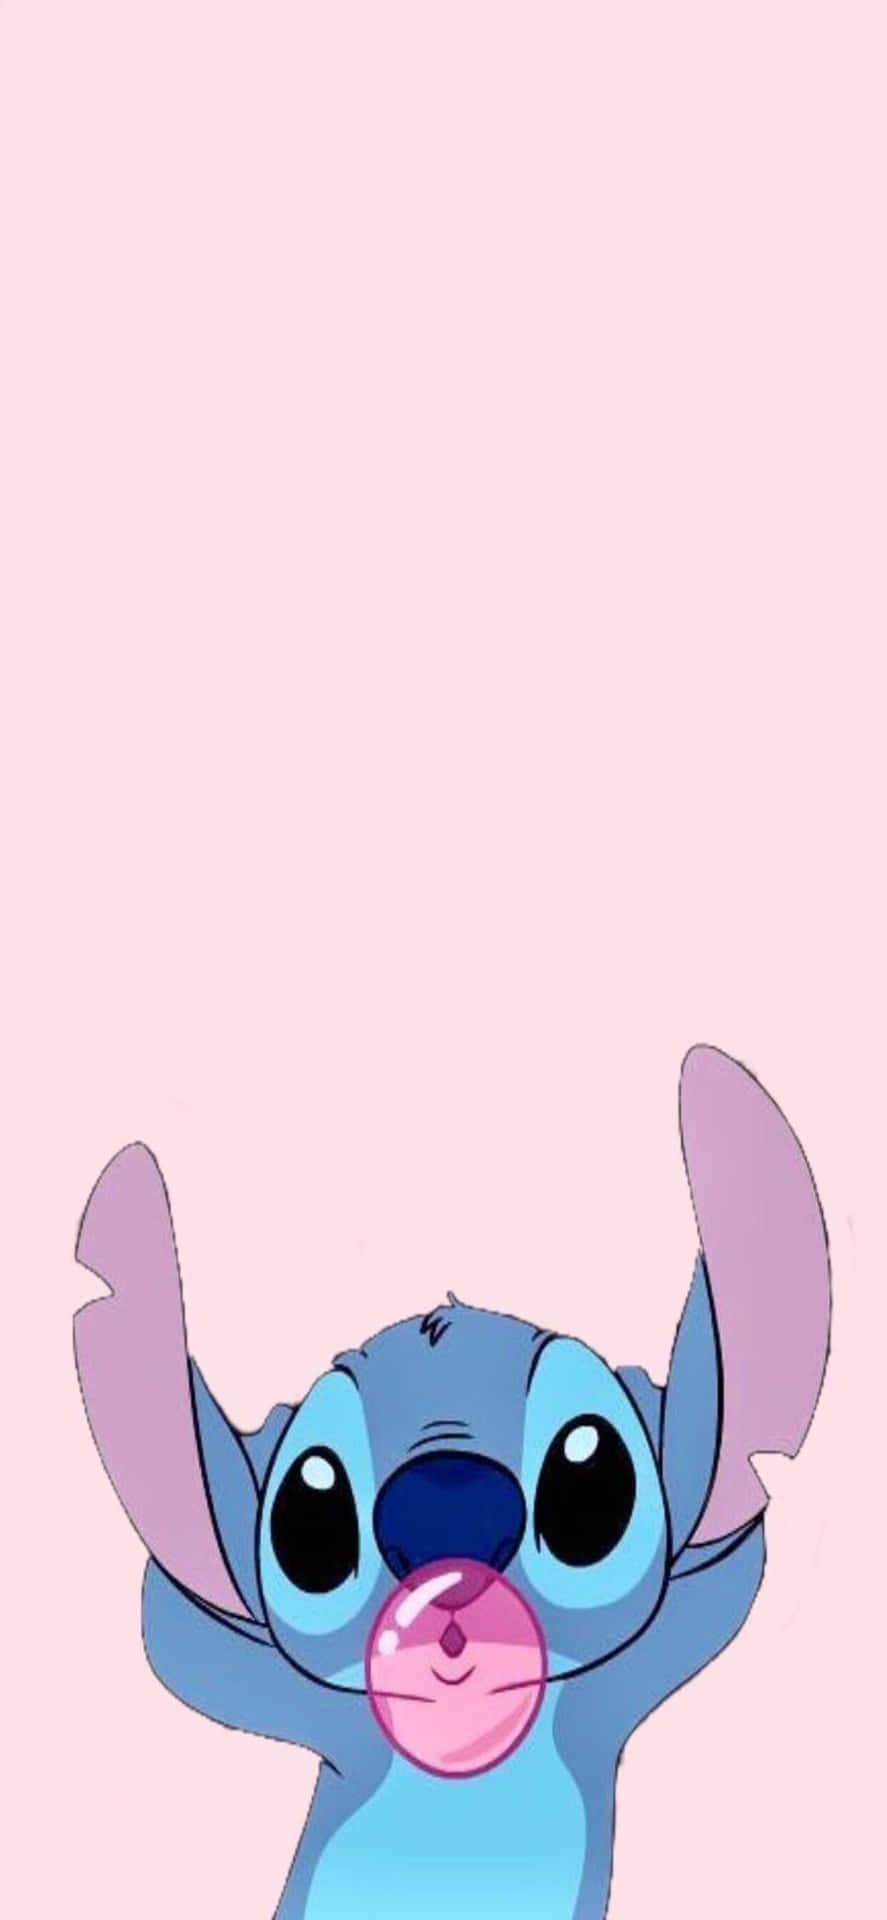 Stitch - Cute Wallpapers